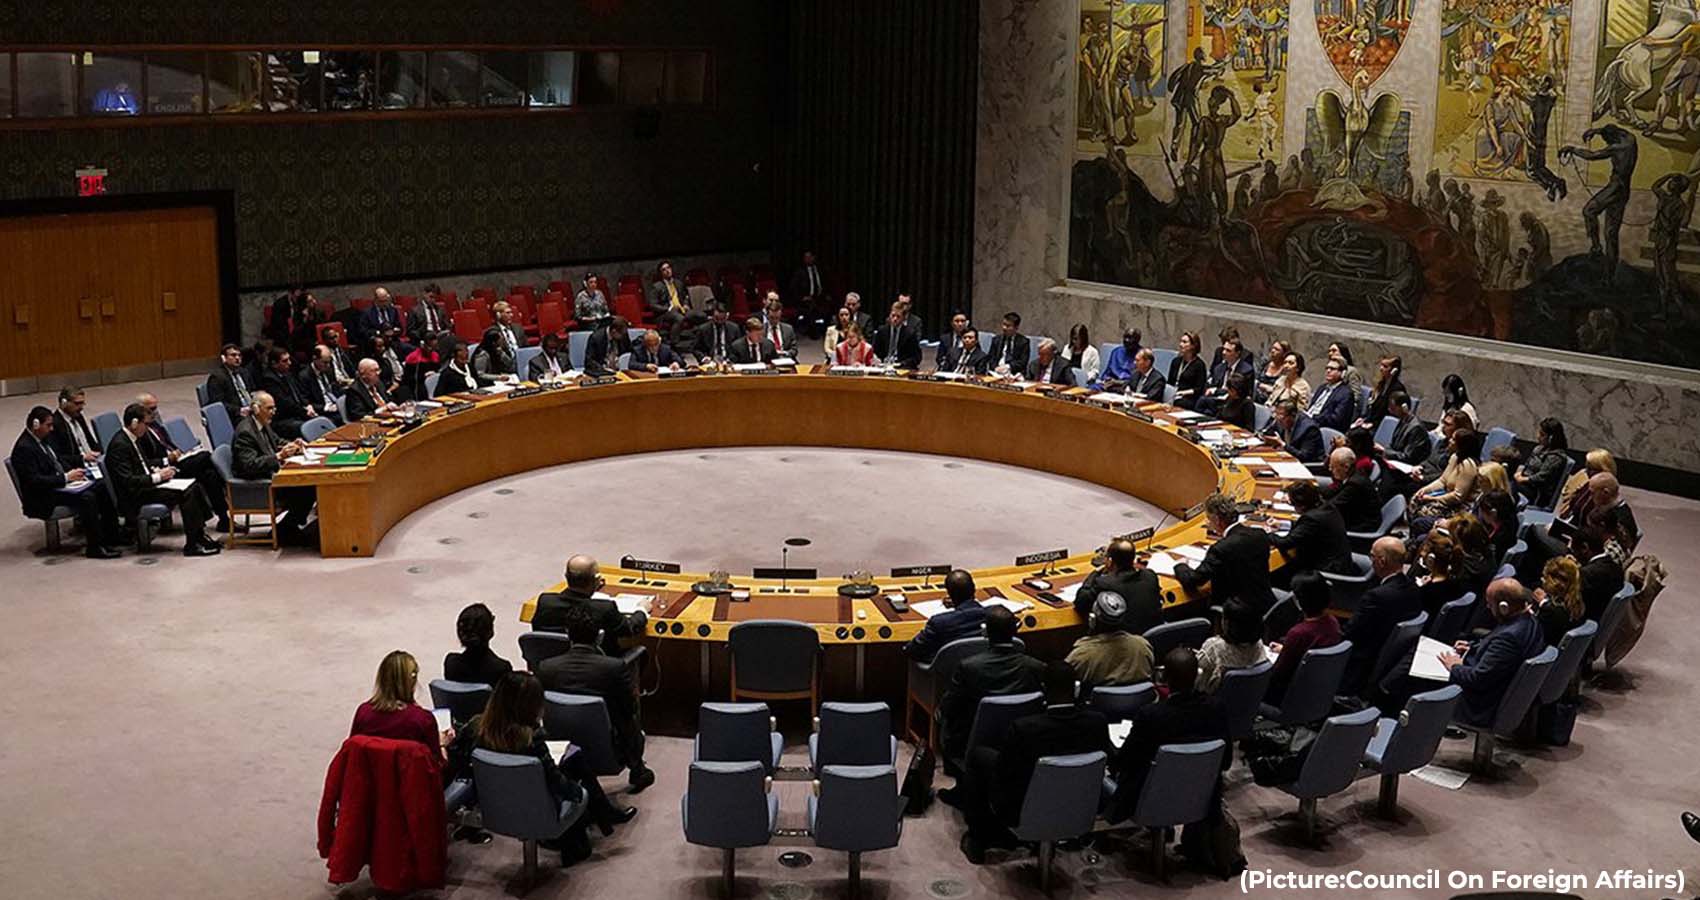 United Nations & Its Leadership Challenged By An Existential Crisis